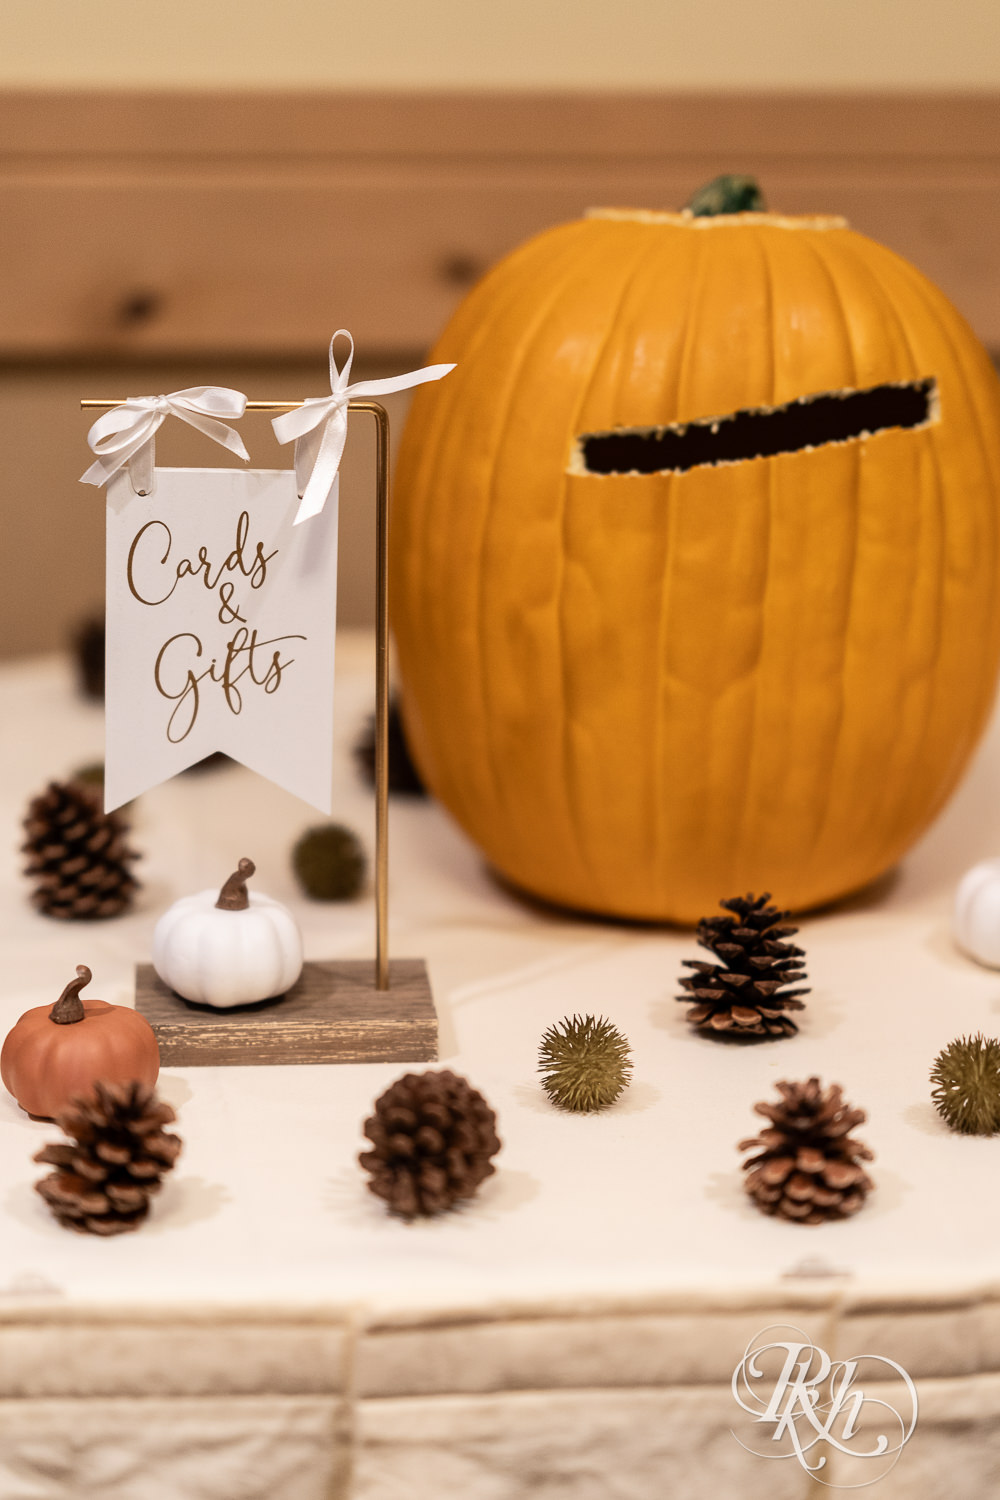 Wedding card table with pumpkin at Bunker Hills Event Center in Coon Rapids, Minnesota.